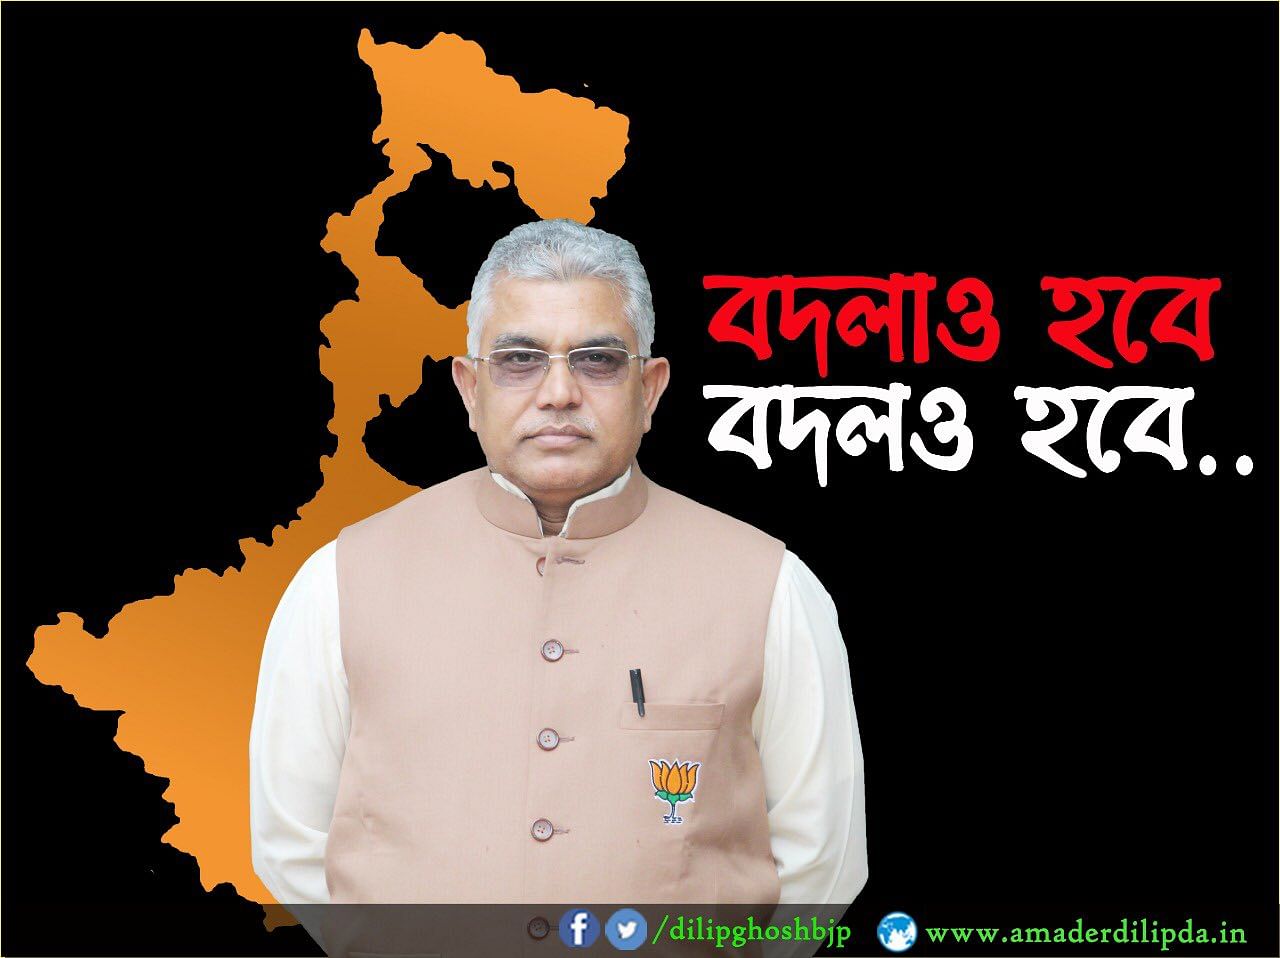 Poster posted by Bengal BJP president Dilip Ghosh on his Twitter handle. The slogan in Bengali means "There will be revenge, there will be change."